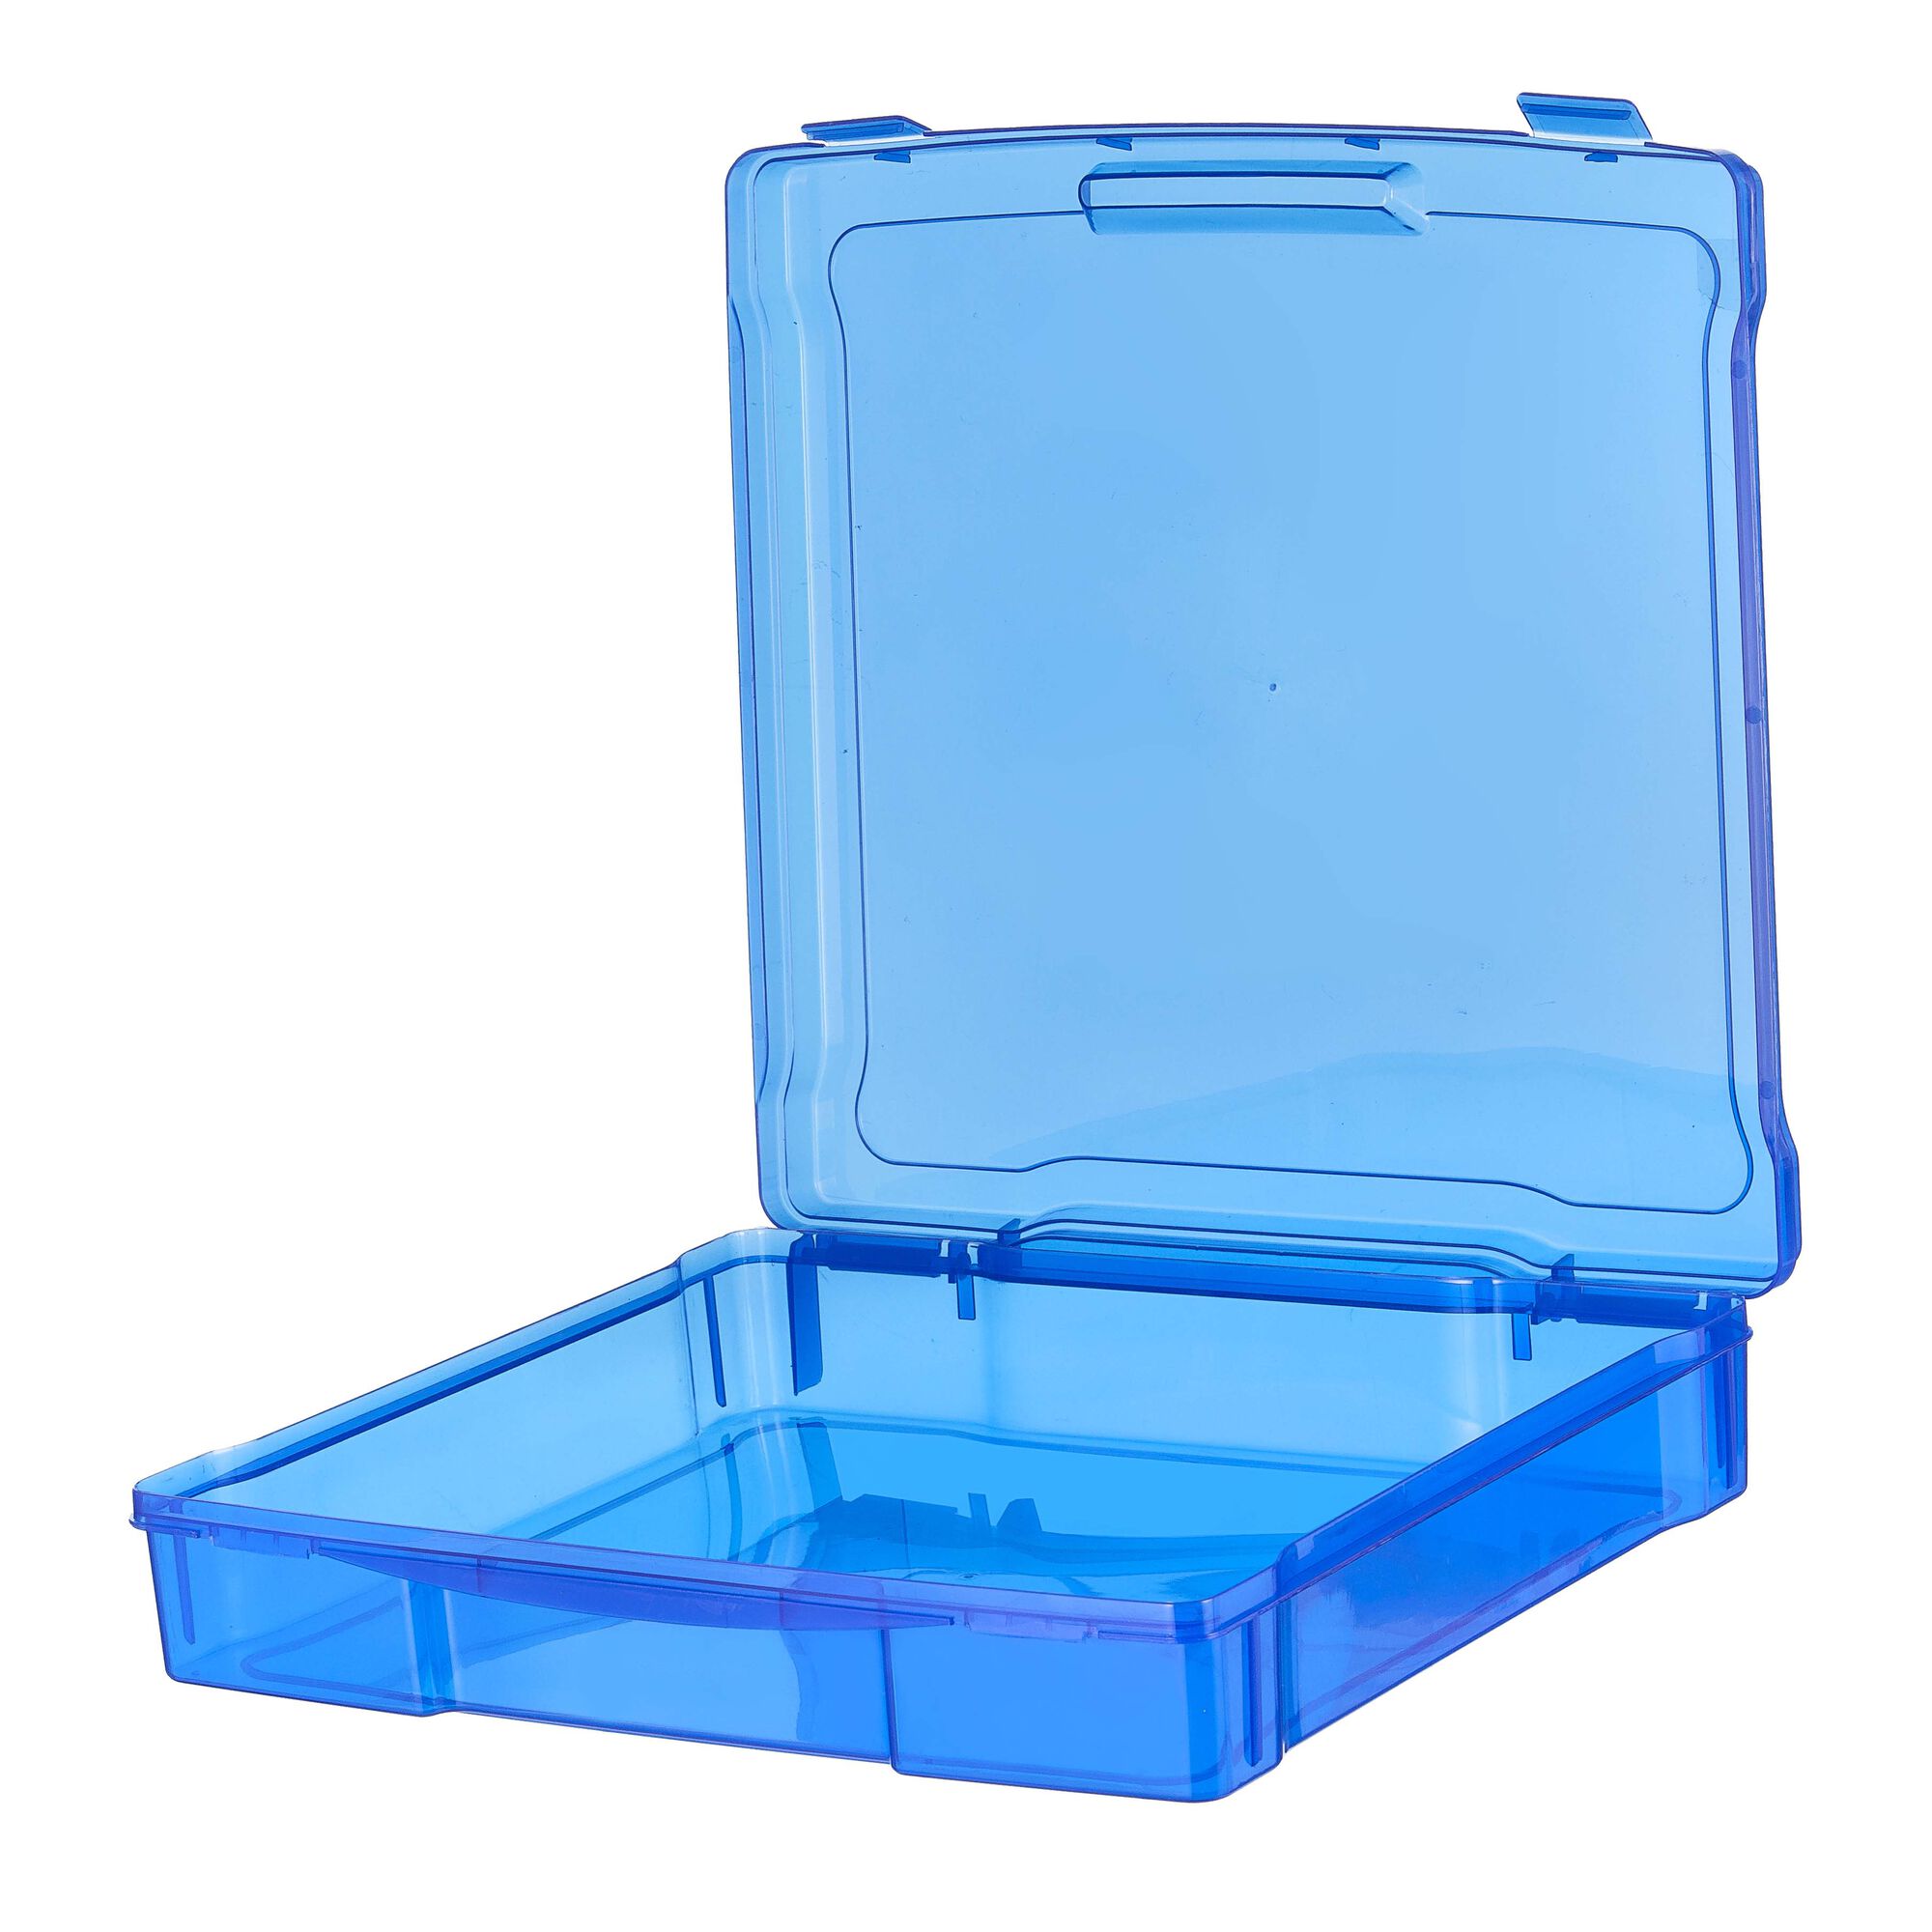 Storex Sorting and Crafts Tray, 12 x 16 Inches, Teal, 12-Pack